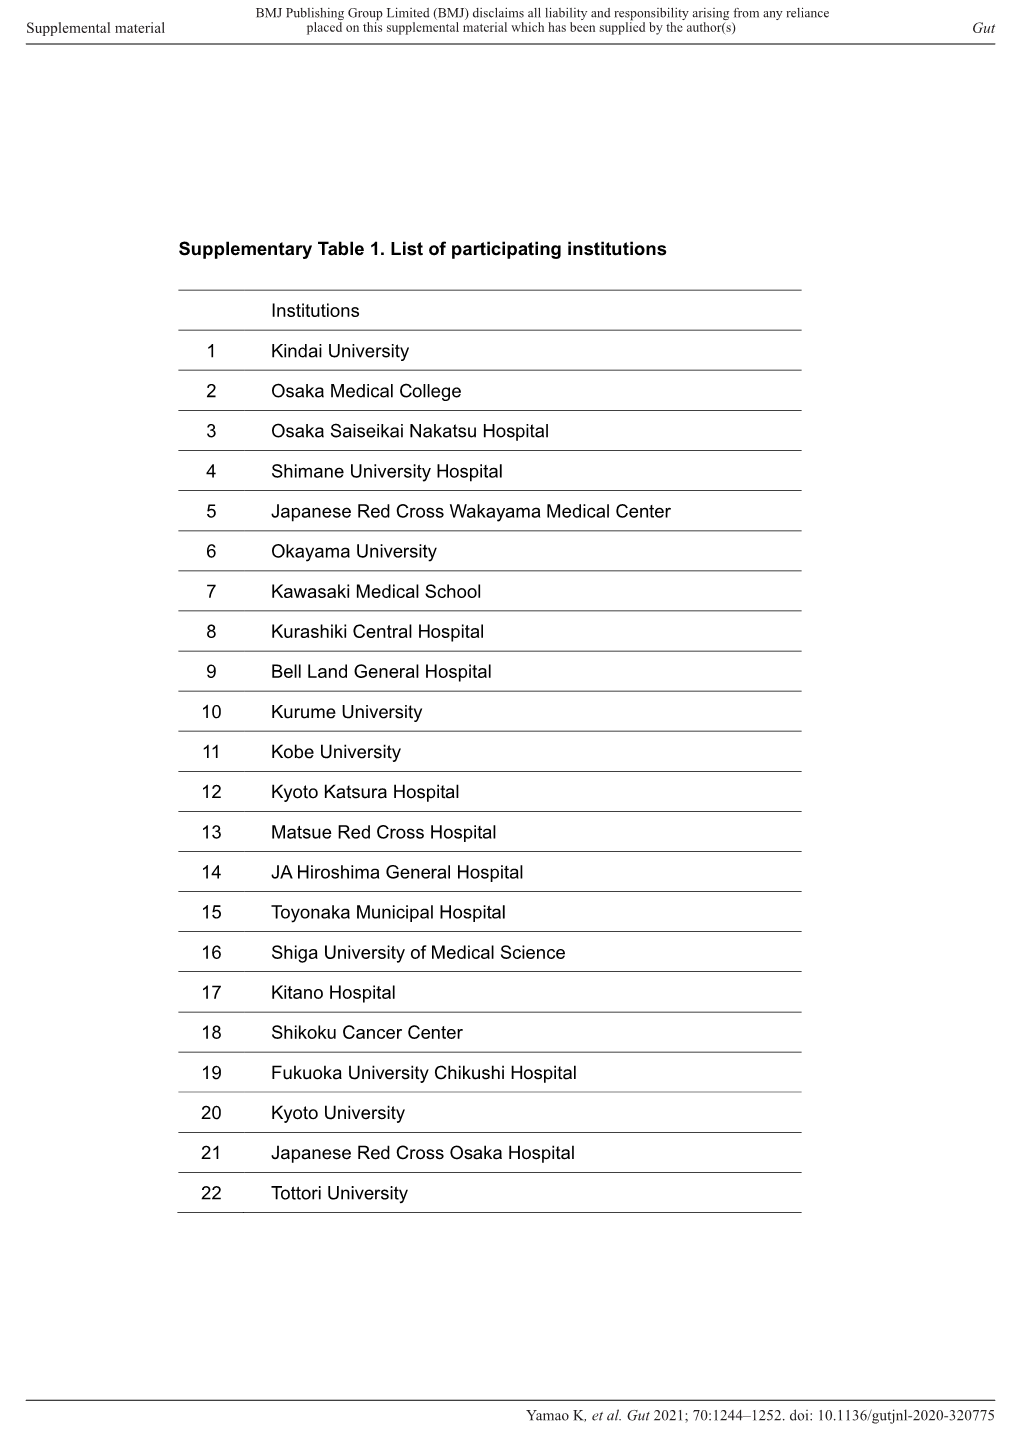 Supplementary Table 1. List of Participating Institutions